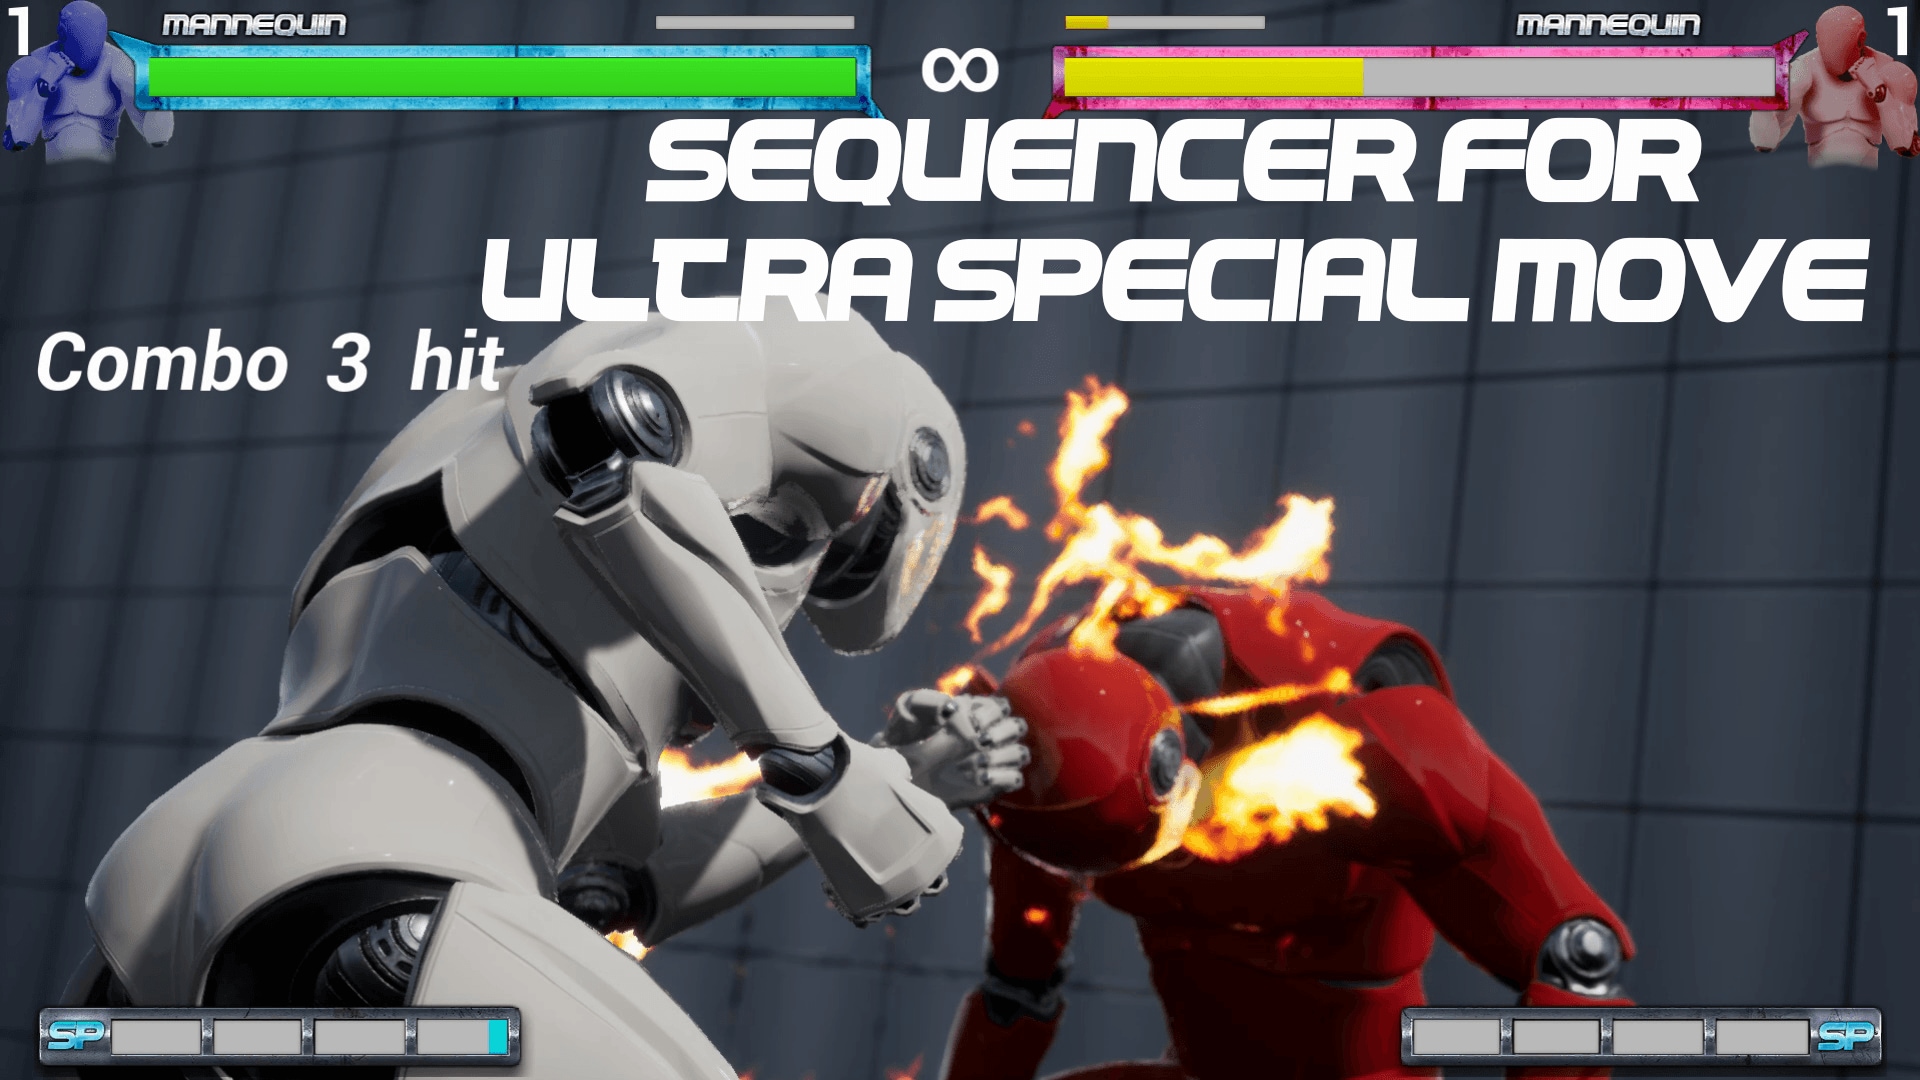 Project: Fighter - Unreal Engine 4 mobile fighting game based on